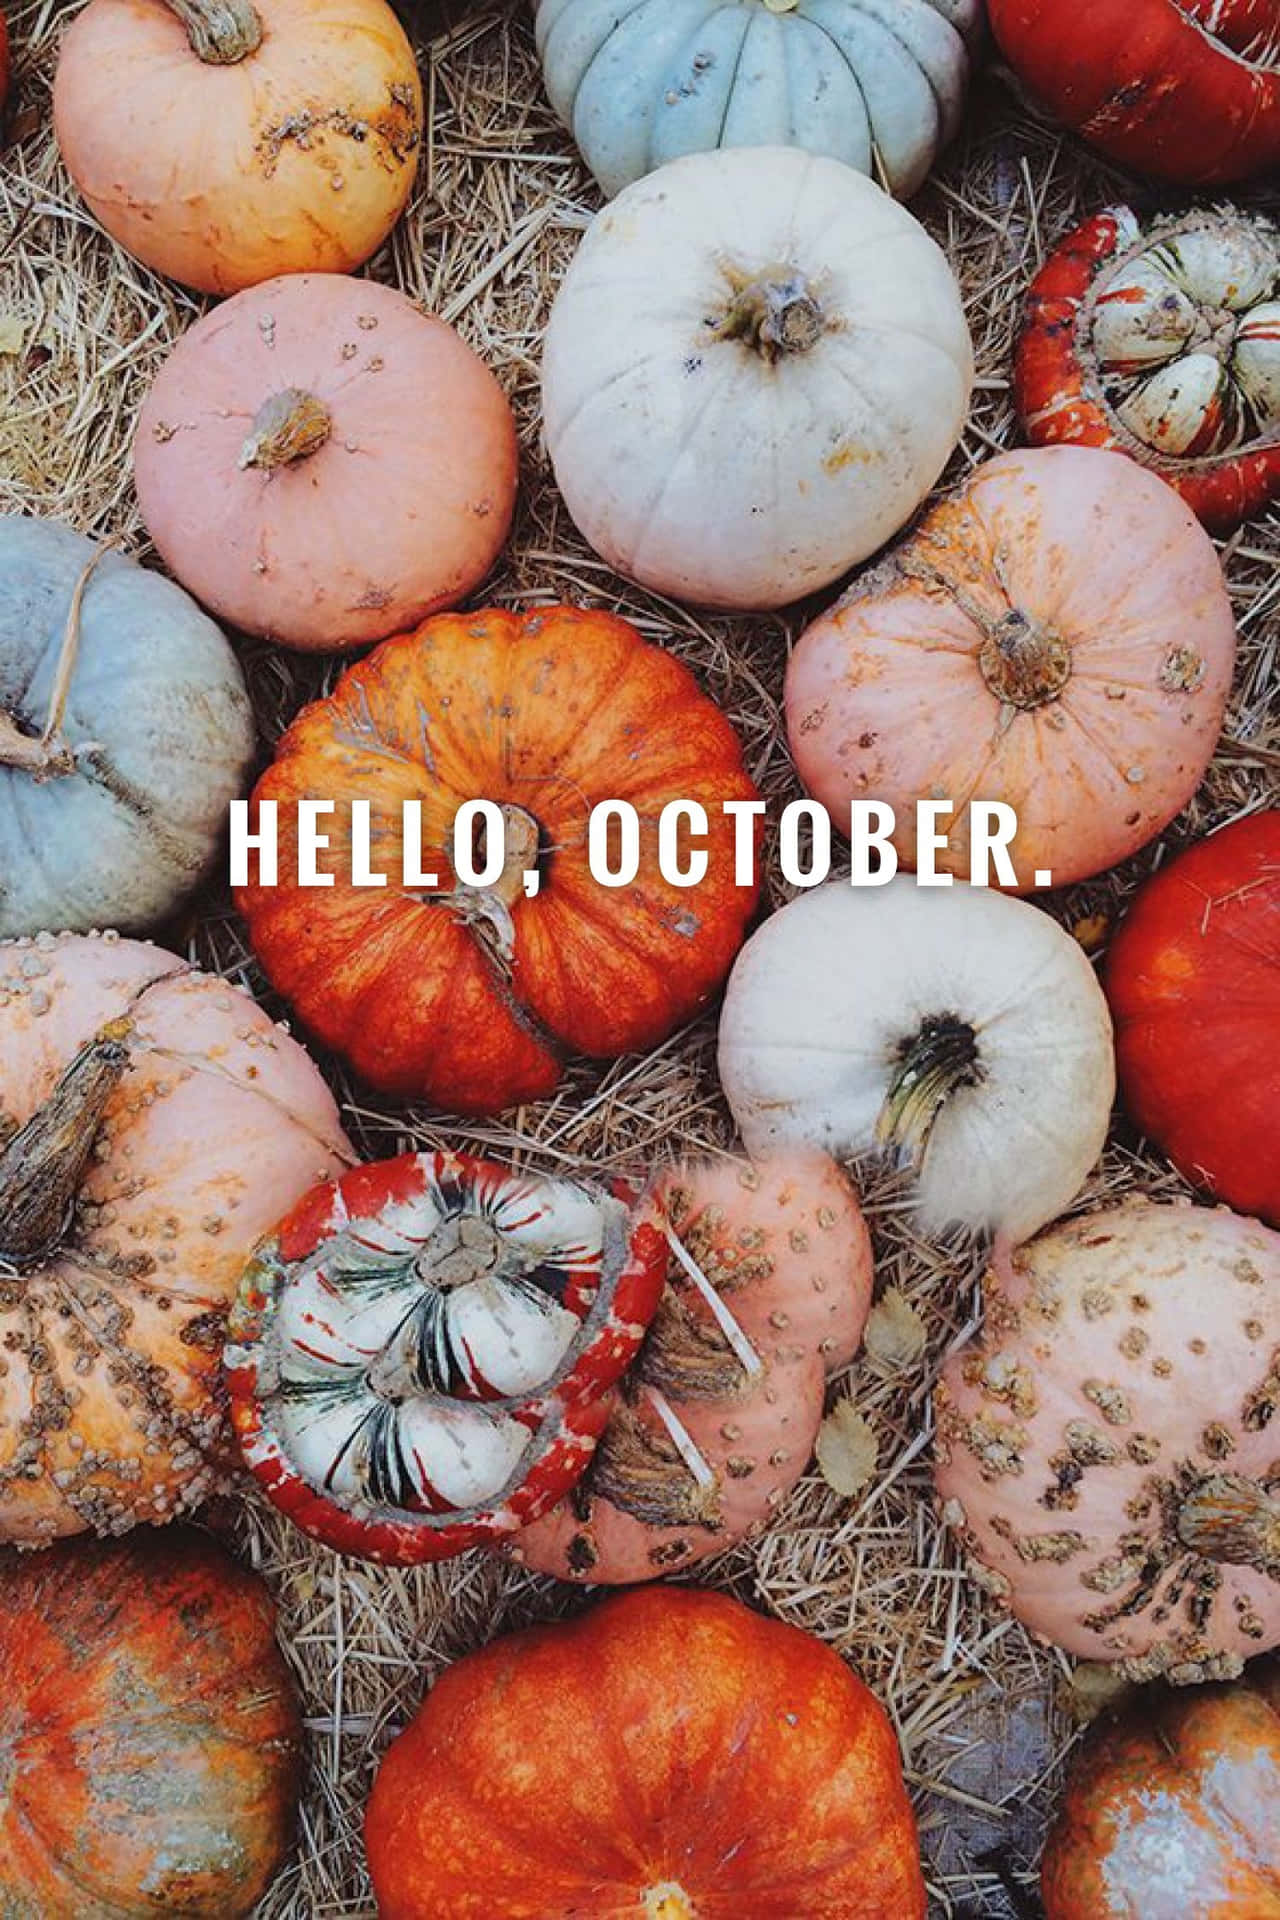 Get Ready for a Festive October with a Pumpkin! Wallpaper